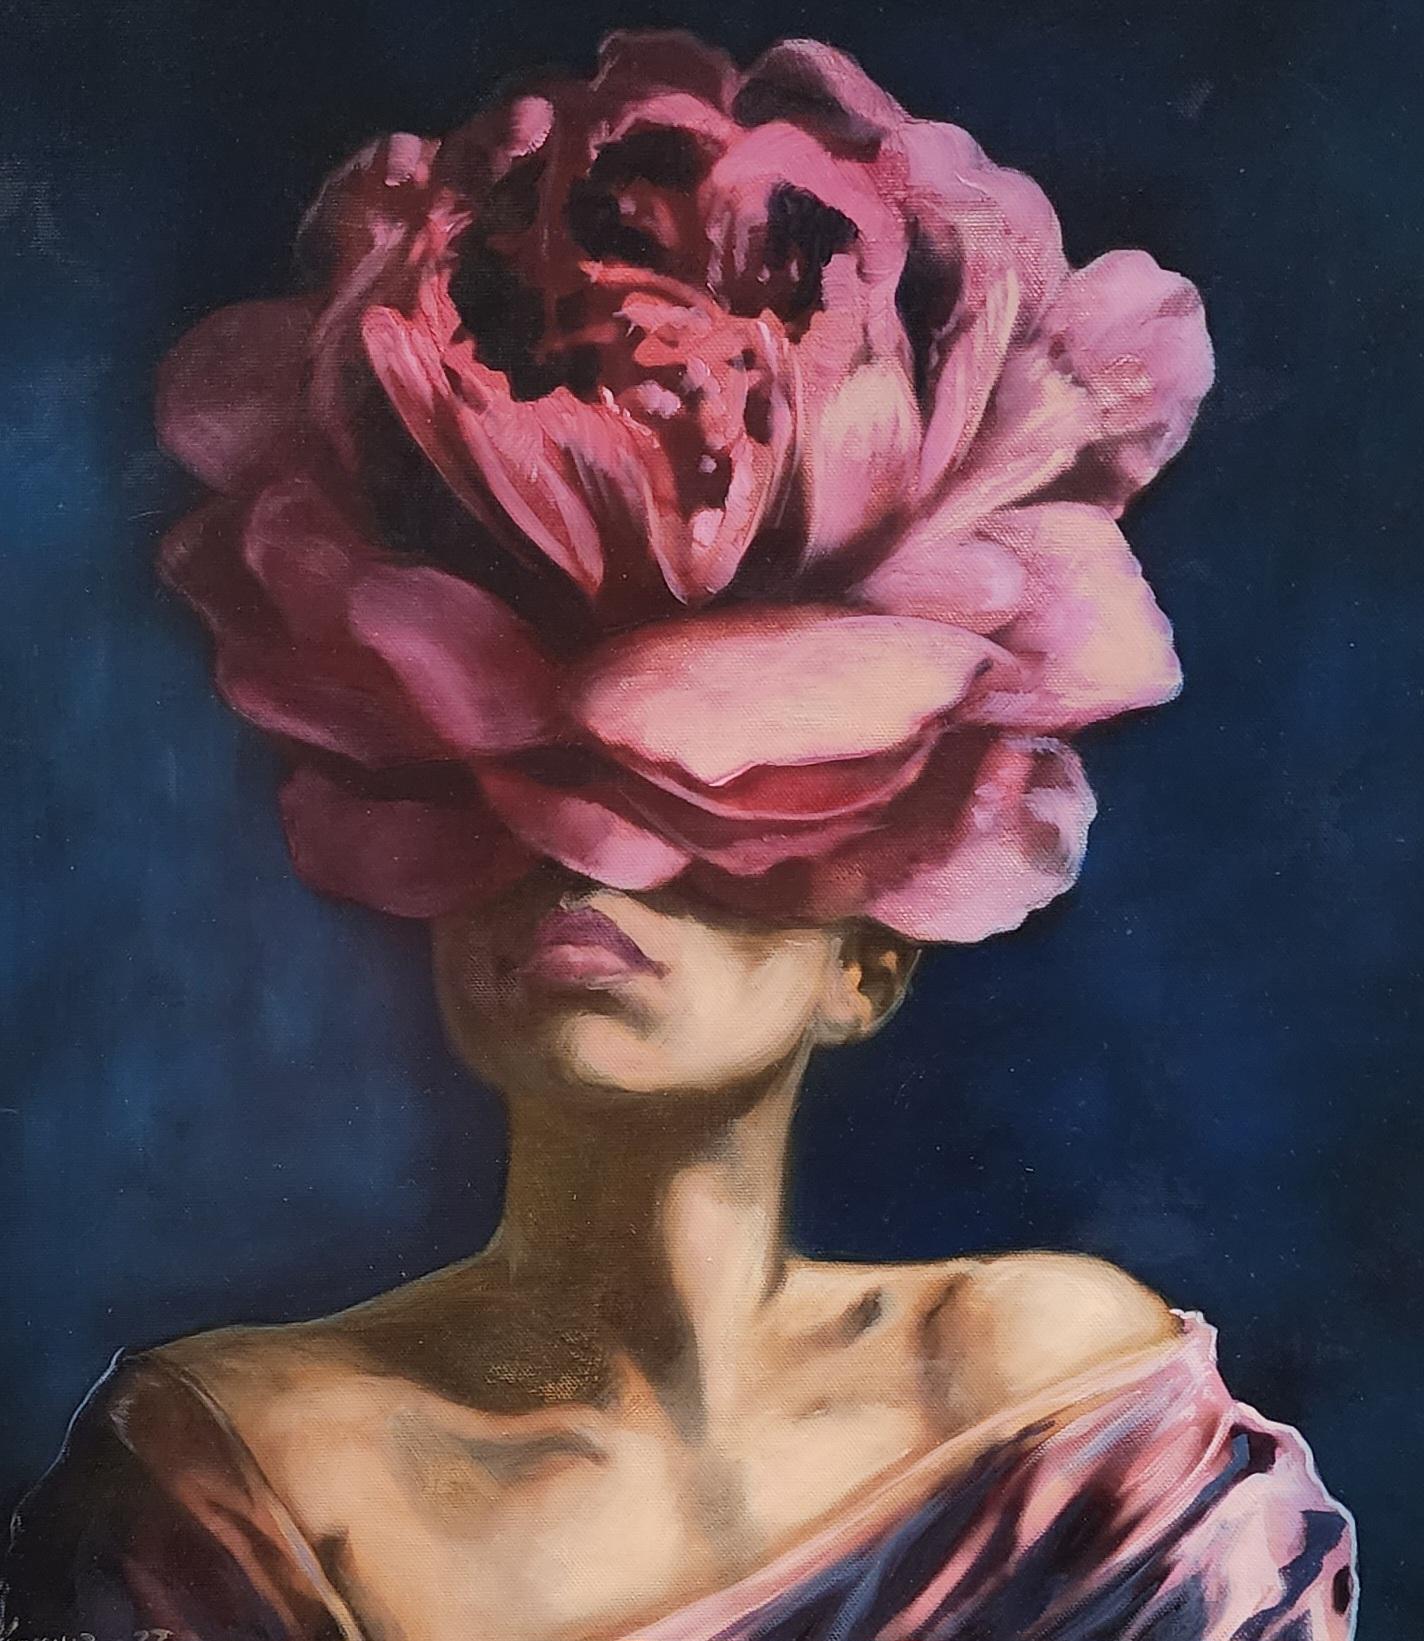 Images may be seen better on a mobile device. FREE SHIPPING
Flor is a new portrait painting by Cristian Mesa Velazquez. Flor is an oil on linen painting and was completed in 2023. It has an archival frame.  Light and Shadow. Framed size is 23 x 23